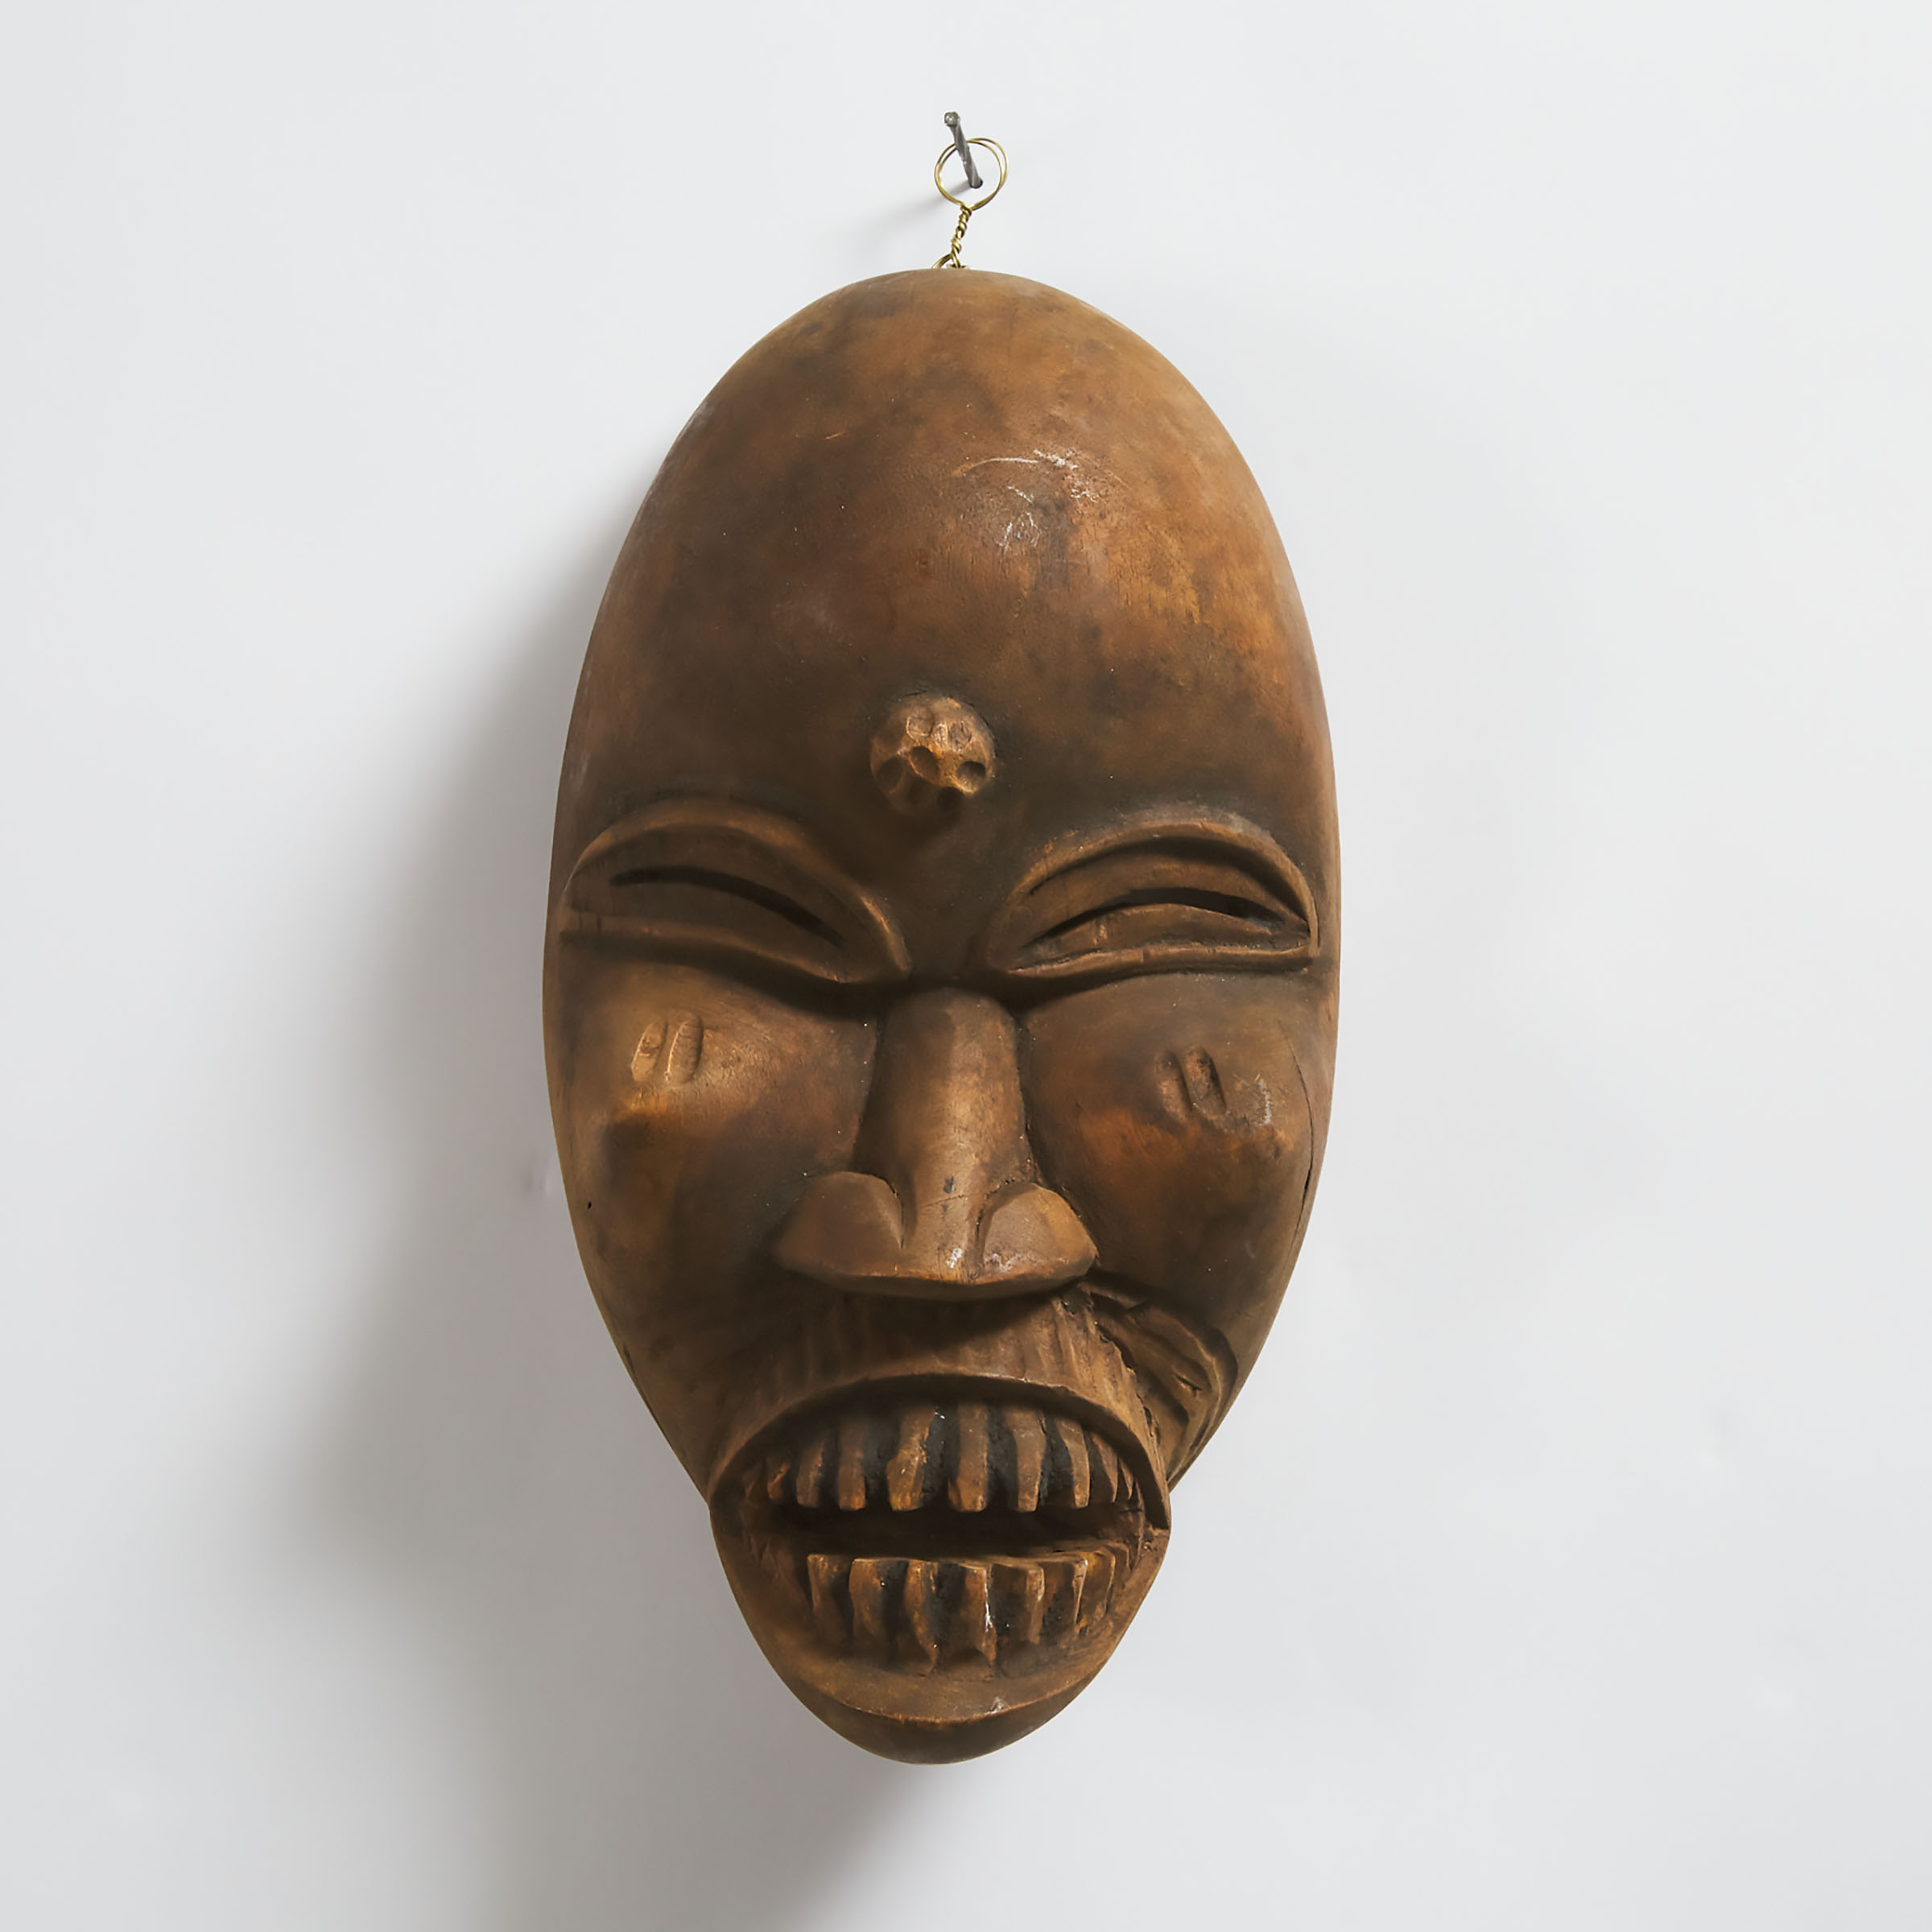 Dan Mask, Ivory Coast/Liberia, West Africa, mid to late 20th century